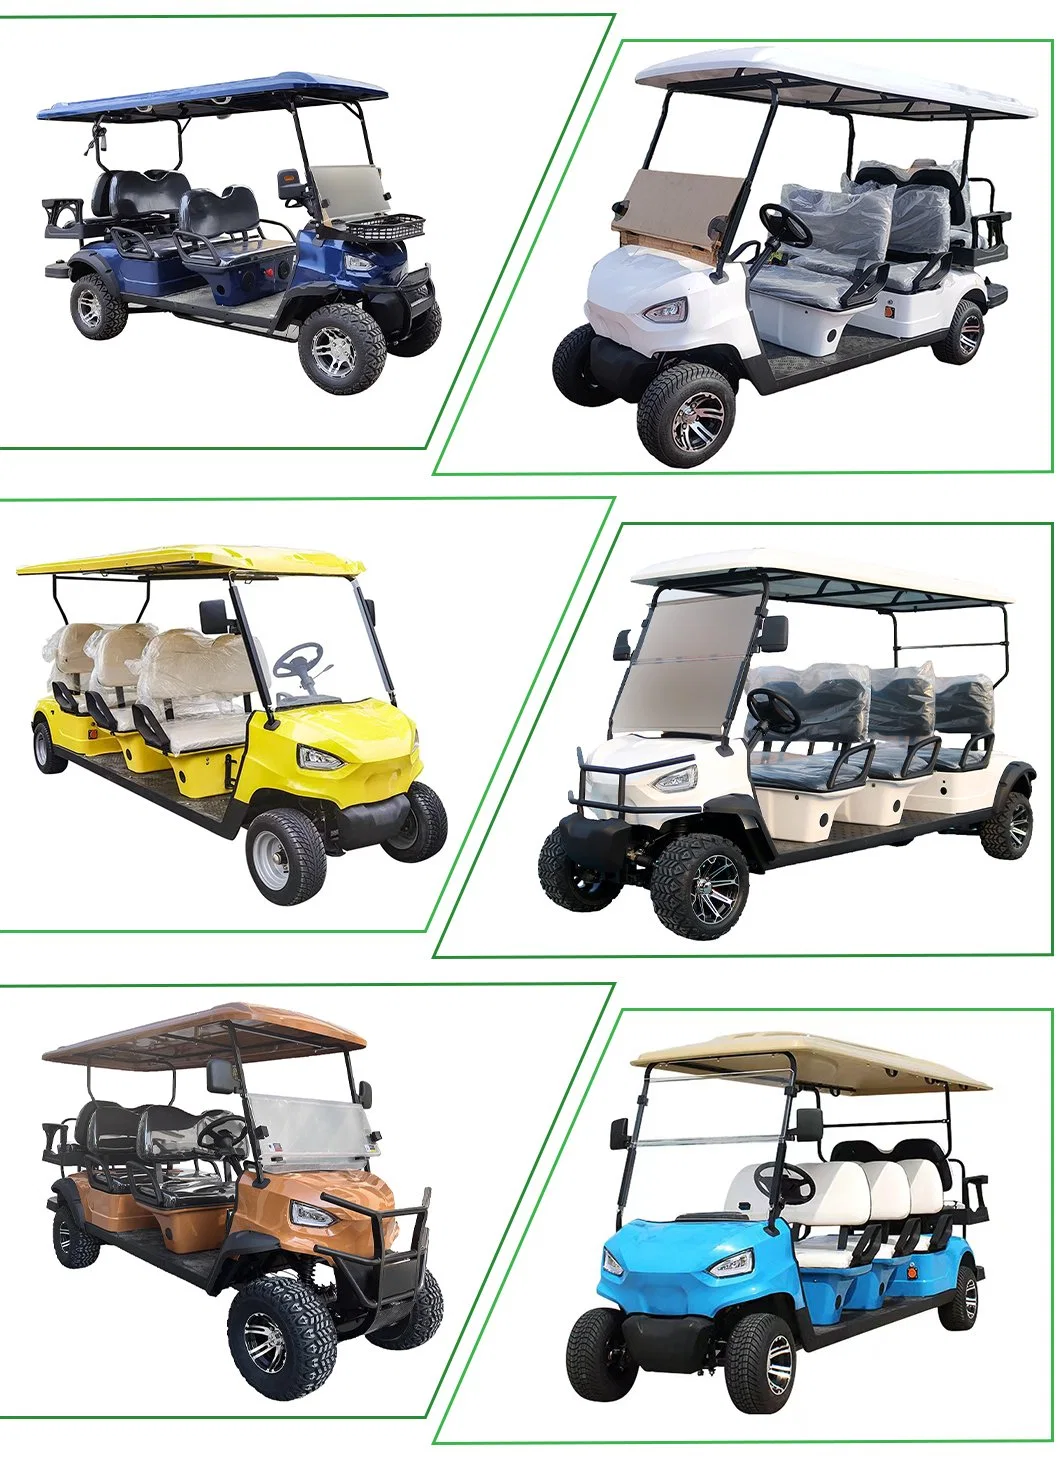 Luxury Lsv 6 Seater 72V Lithium Buggy off Road Hunting Golf Cart